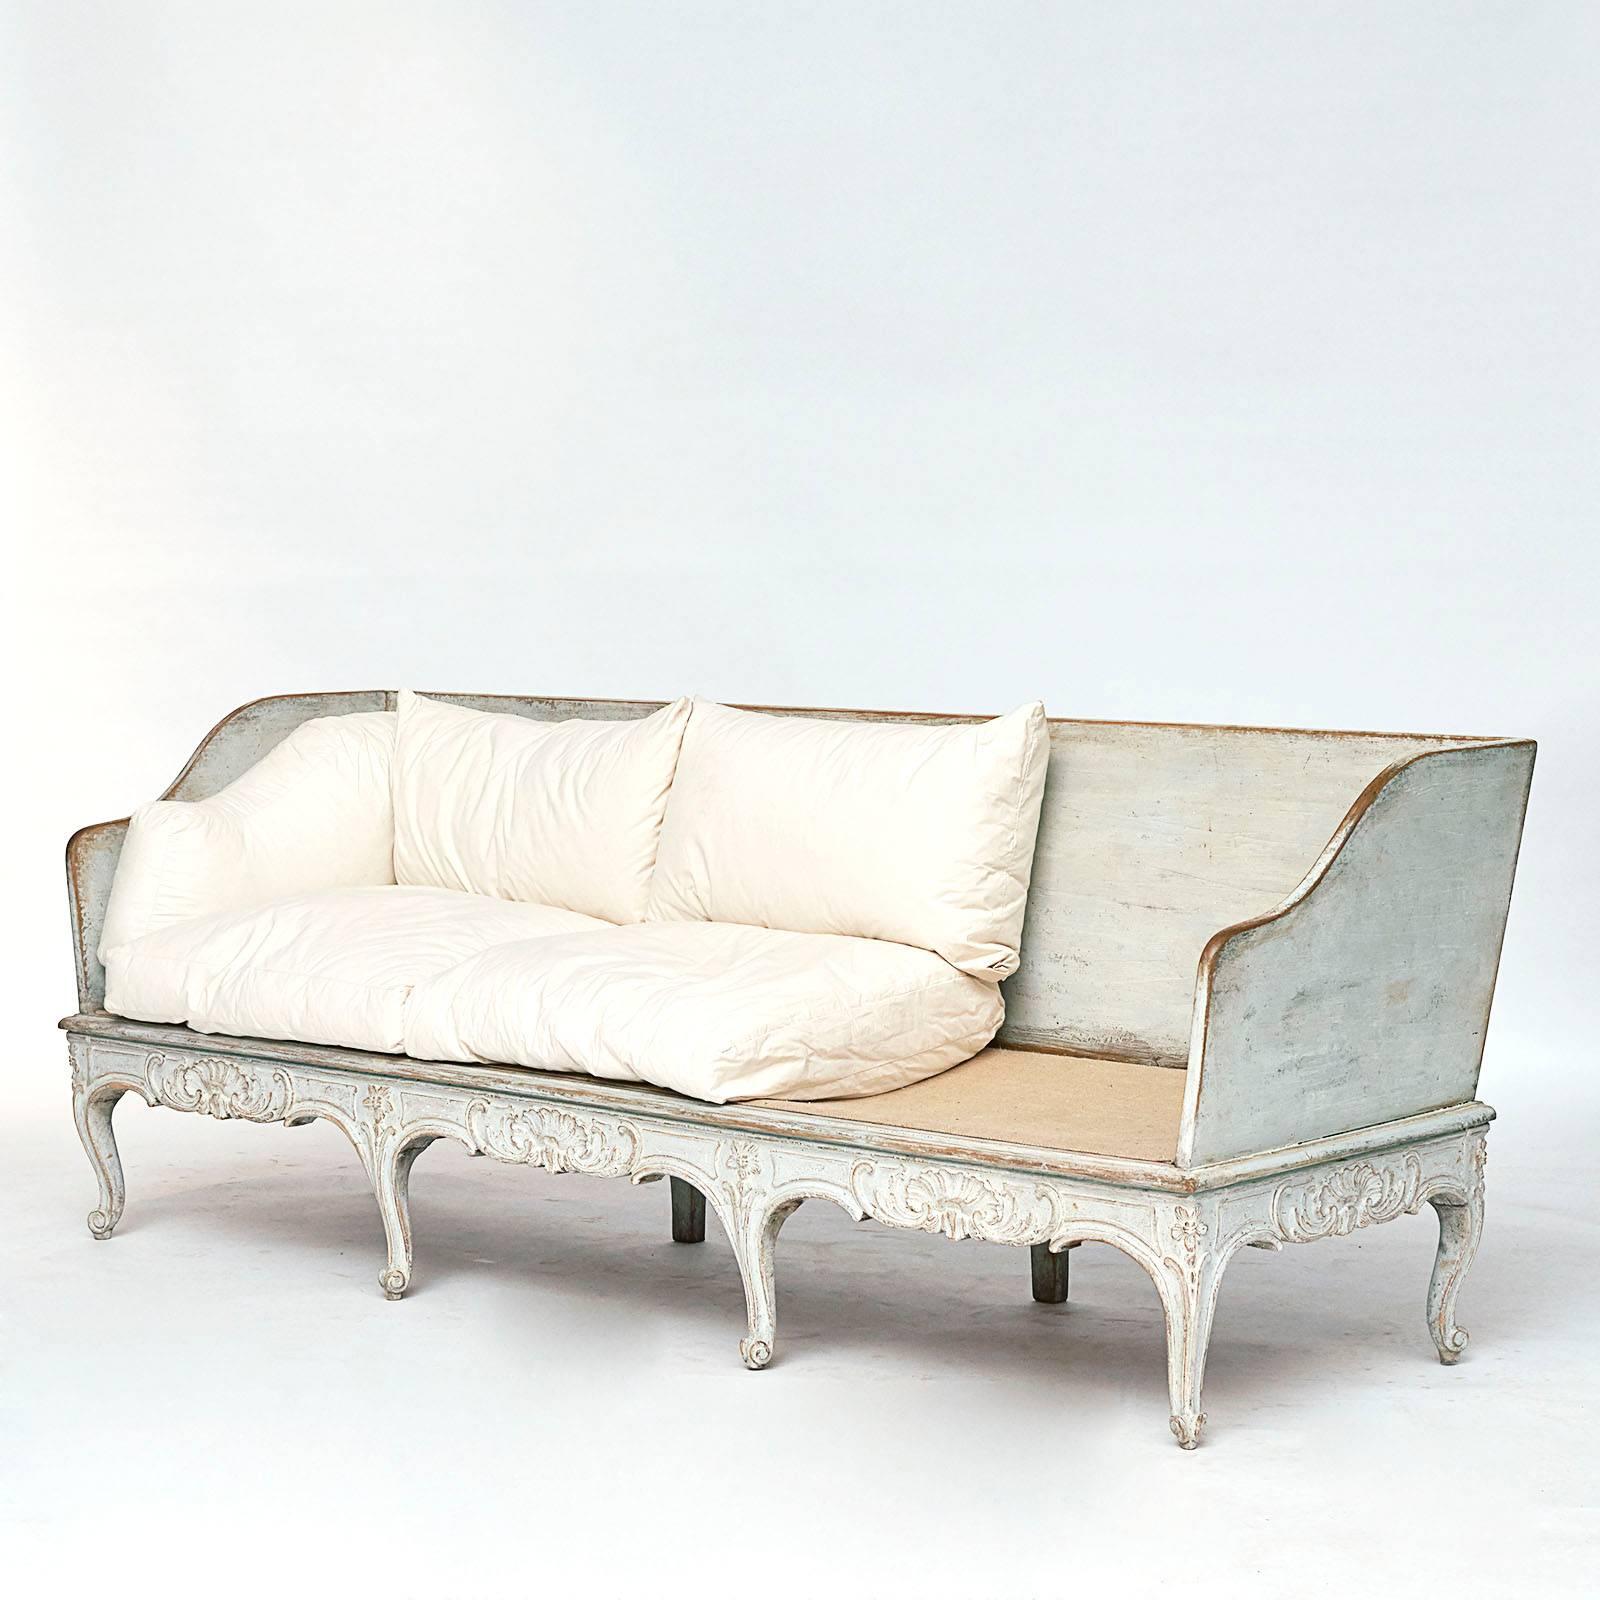 A good Swedish Rococo painted sofa, last quarter 18th century with a straight back and slightly curved armrests and loose white cotton feather filled cushions, a scrolled and shell carved frieze raised on cabriole legs.

 